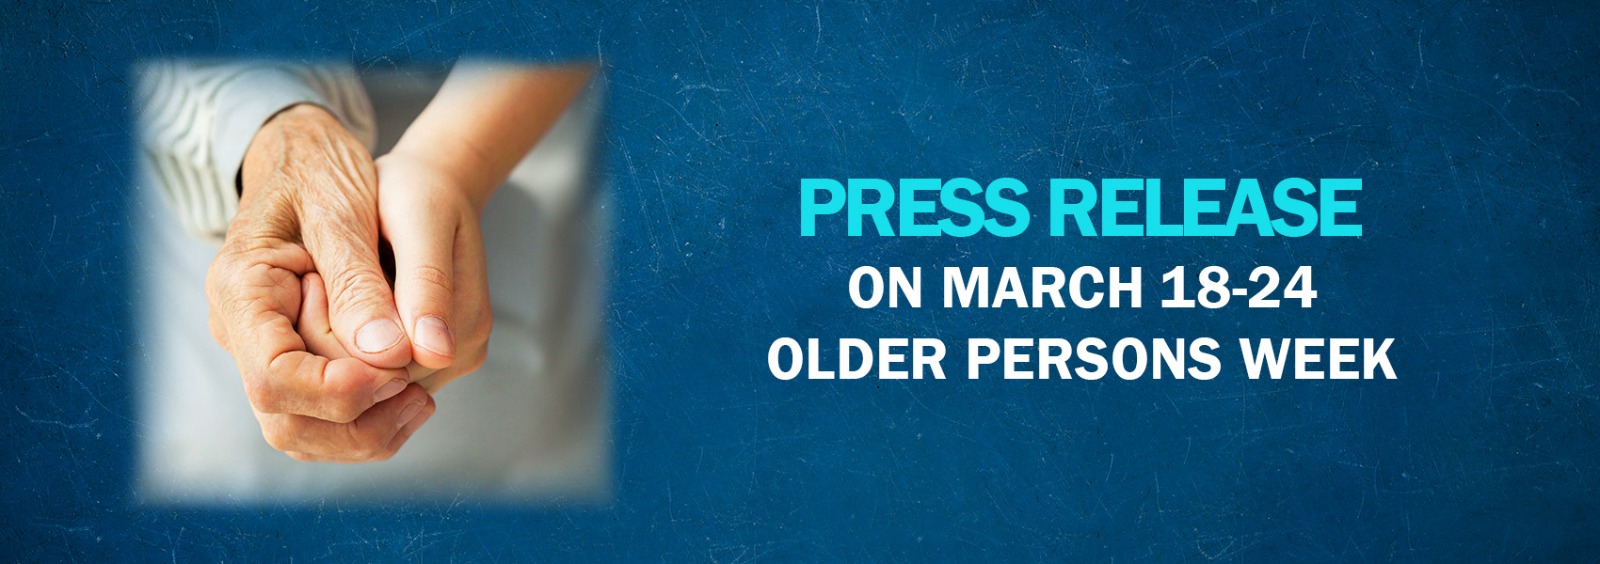 Press Release on March 18-24 Older Persons Week